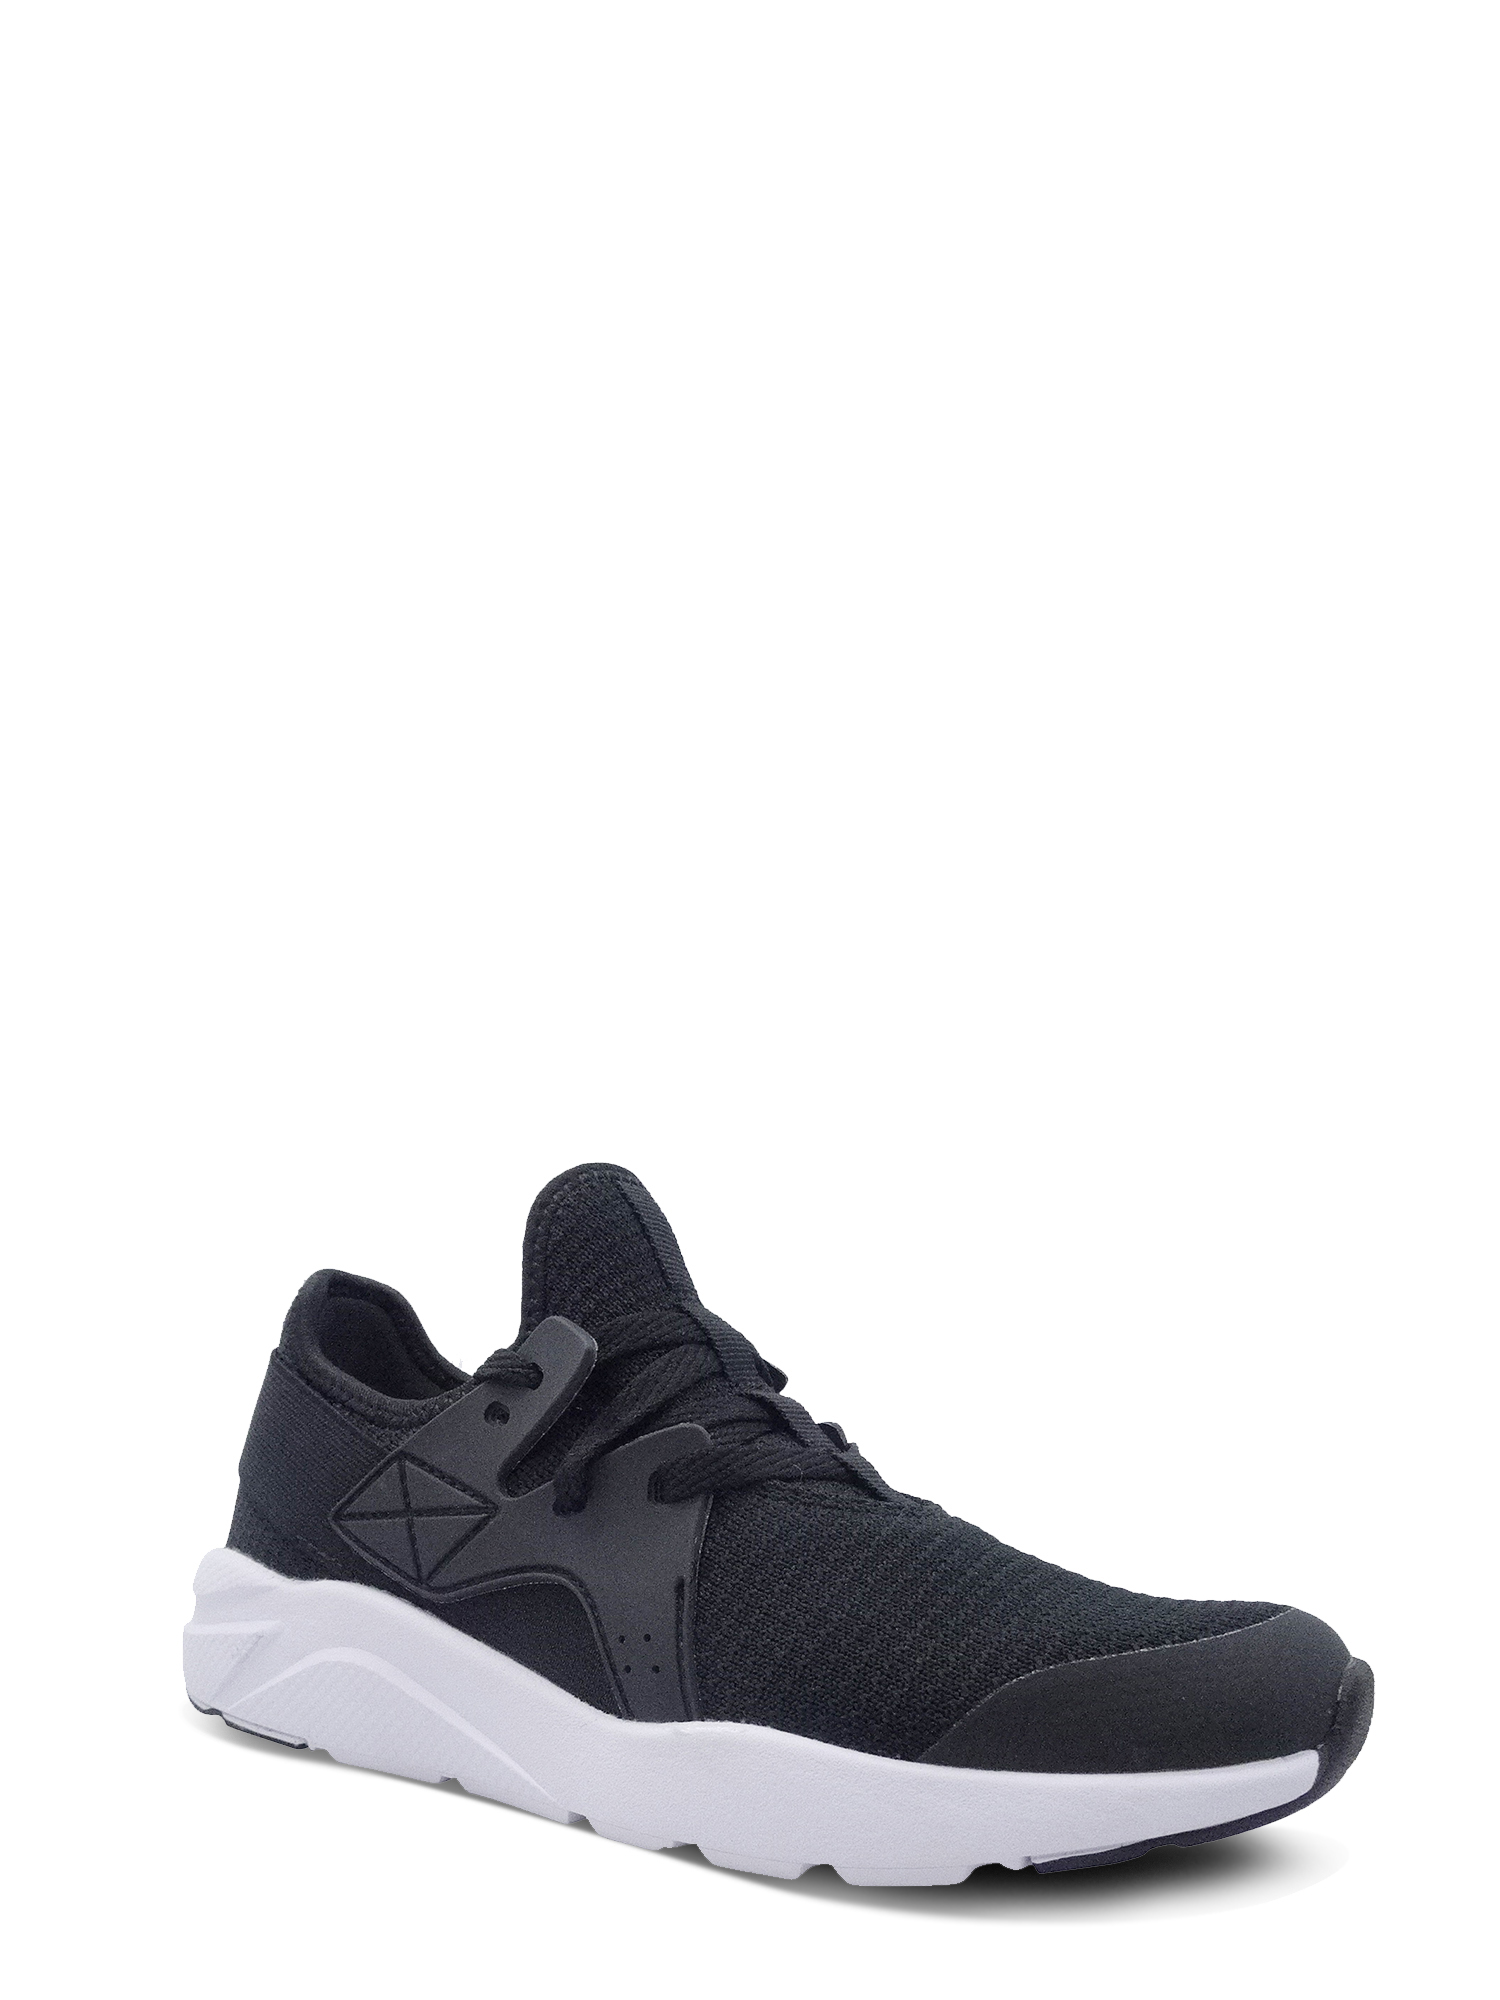 Women's Caged Mesh Athletic Shoe - image 1 of 5